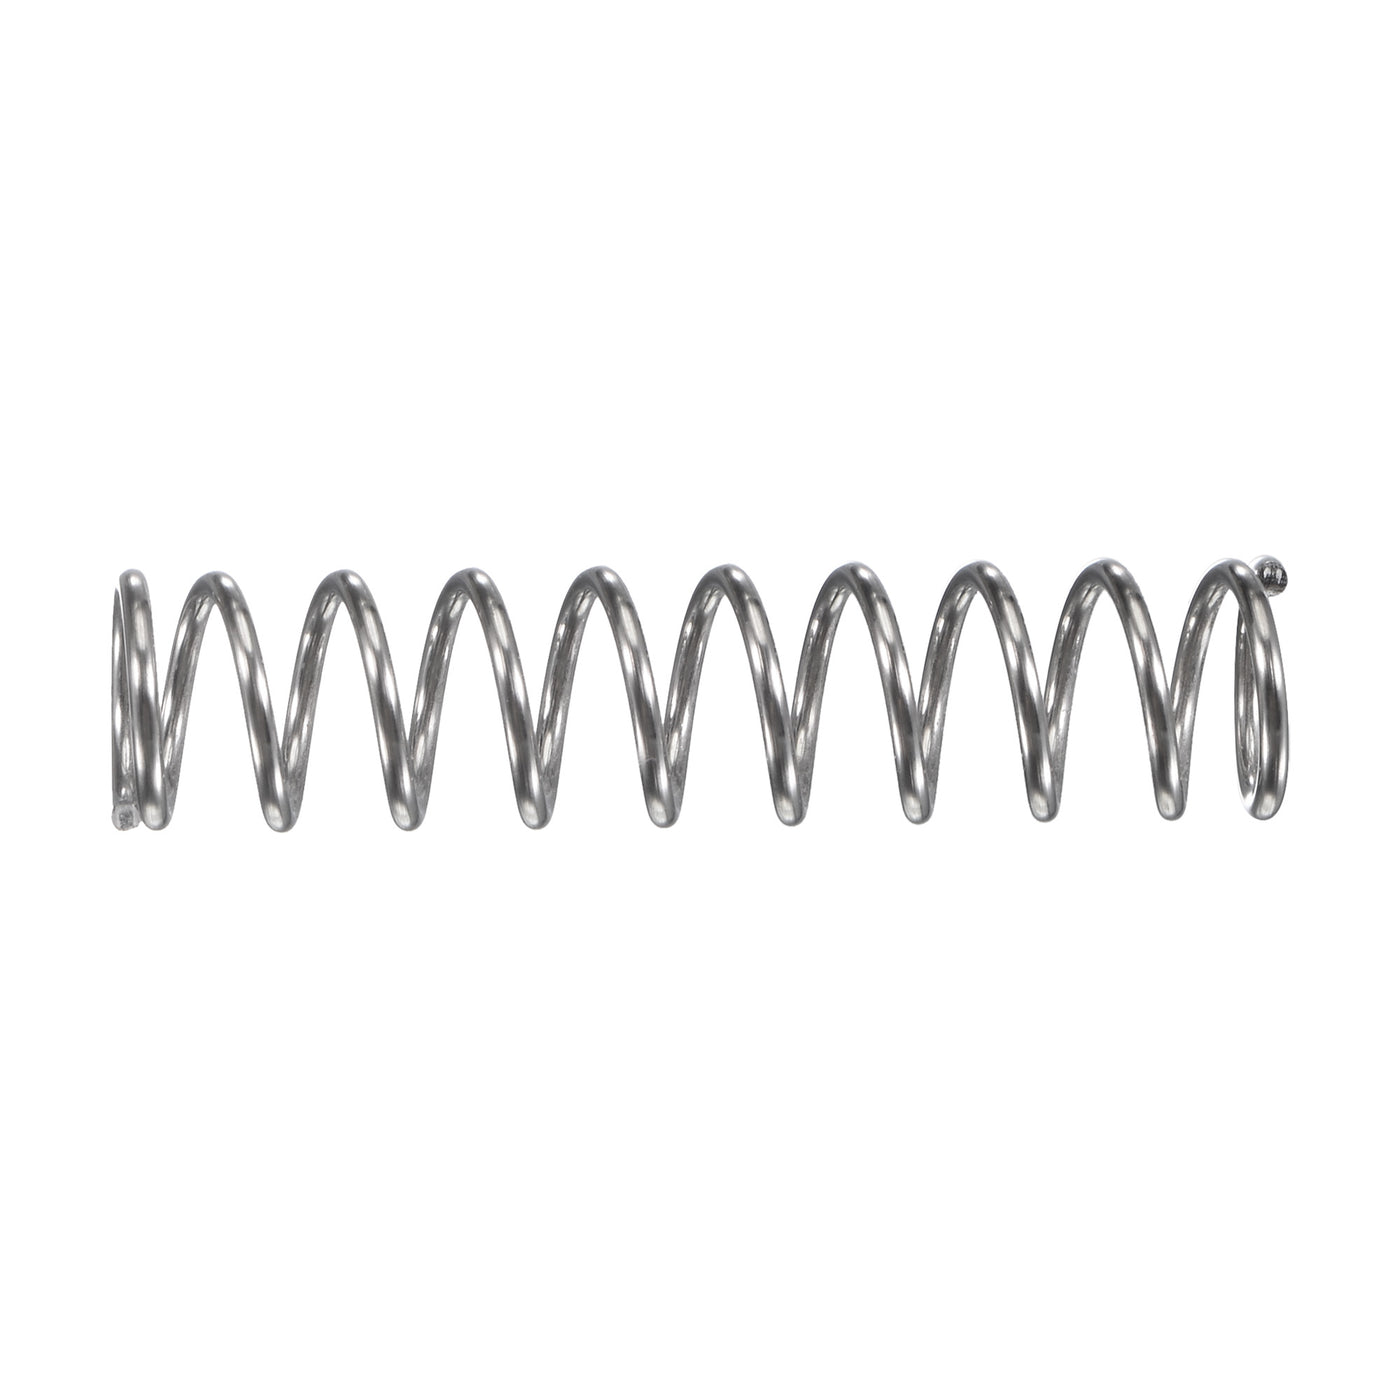 uxcell Uxcell 7mmx0.8mmx30mm 304 Stainless Steel Compression Spring 17.2N Load Capacity 10pcs